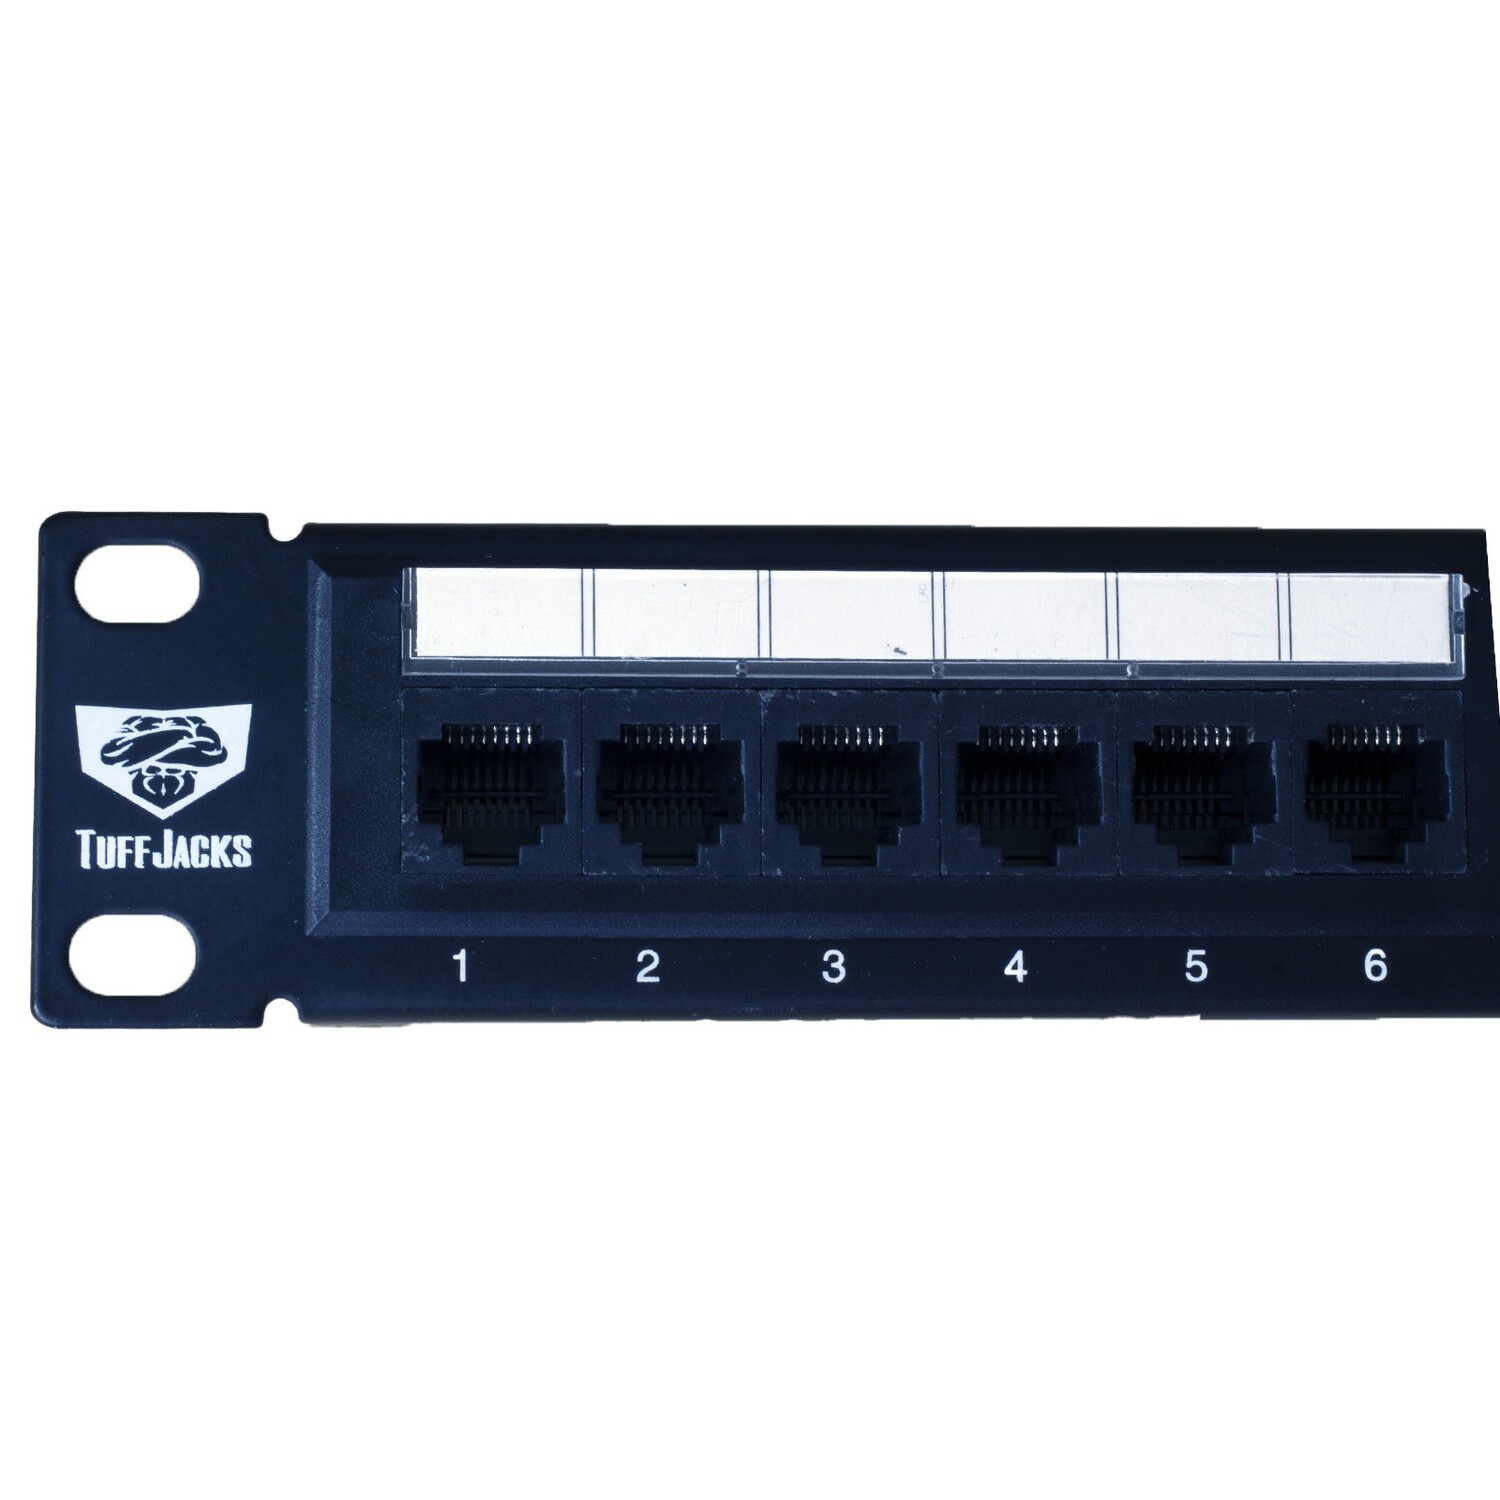 24 Port Cat-6 Patch Panel with Wire Managemant Bar as Low as $24.00 ea.